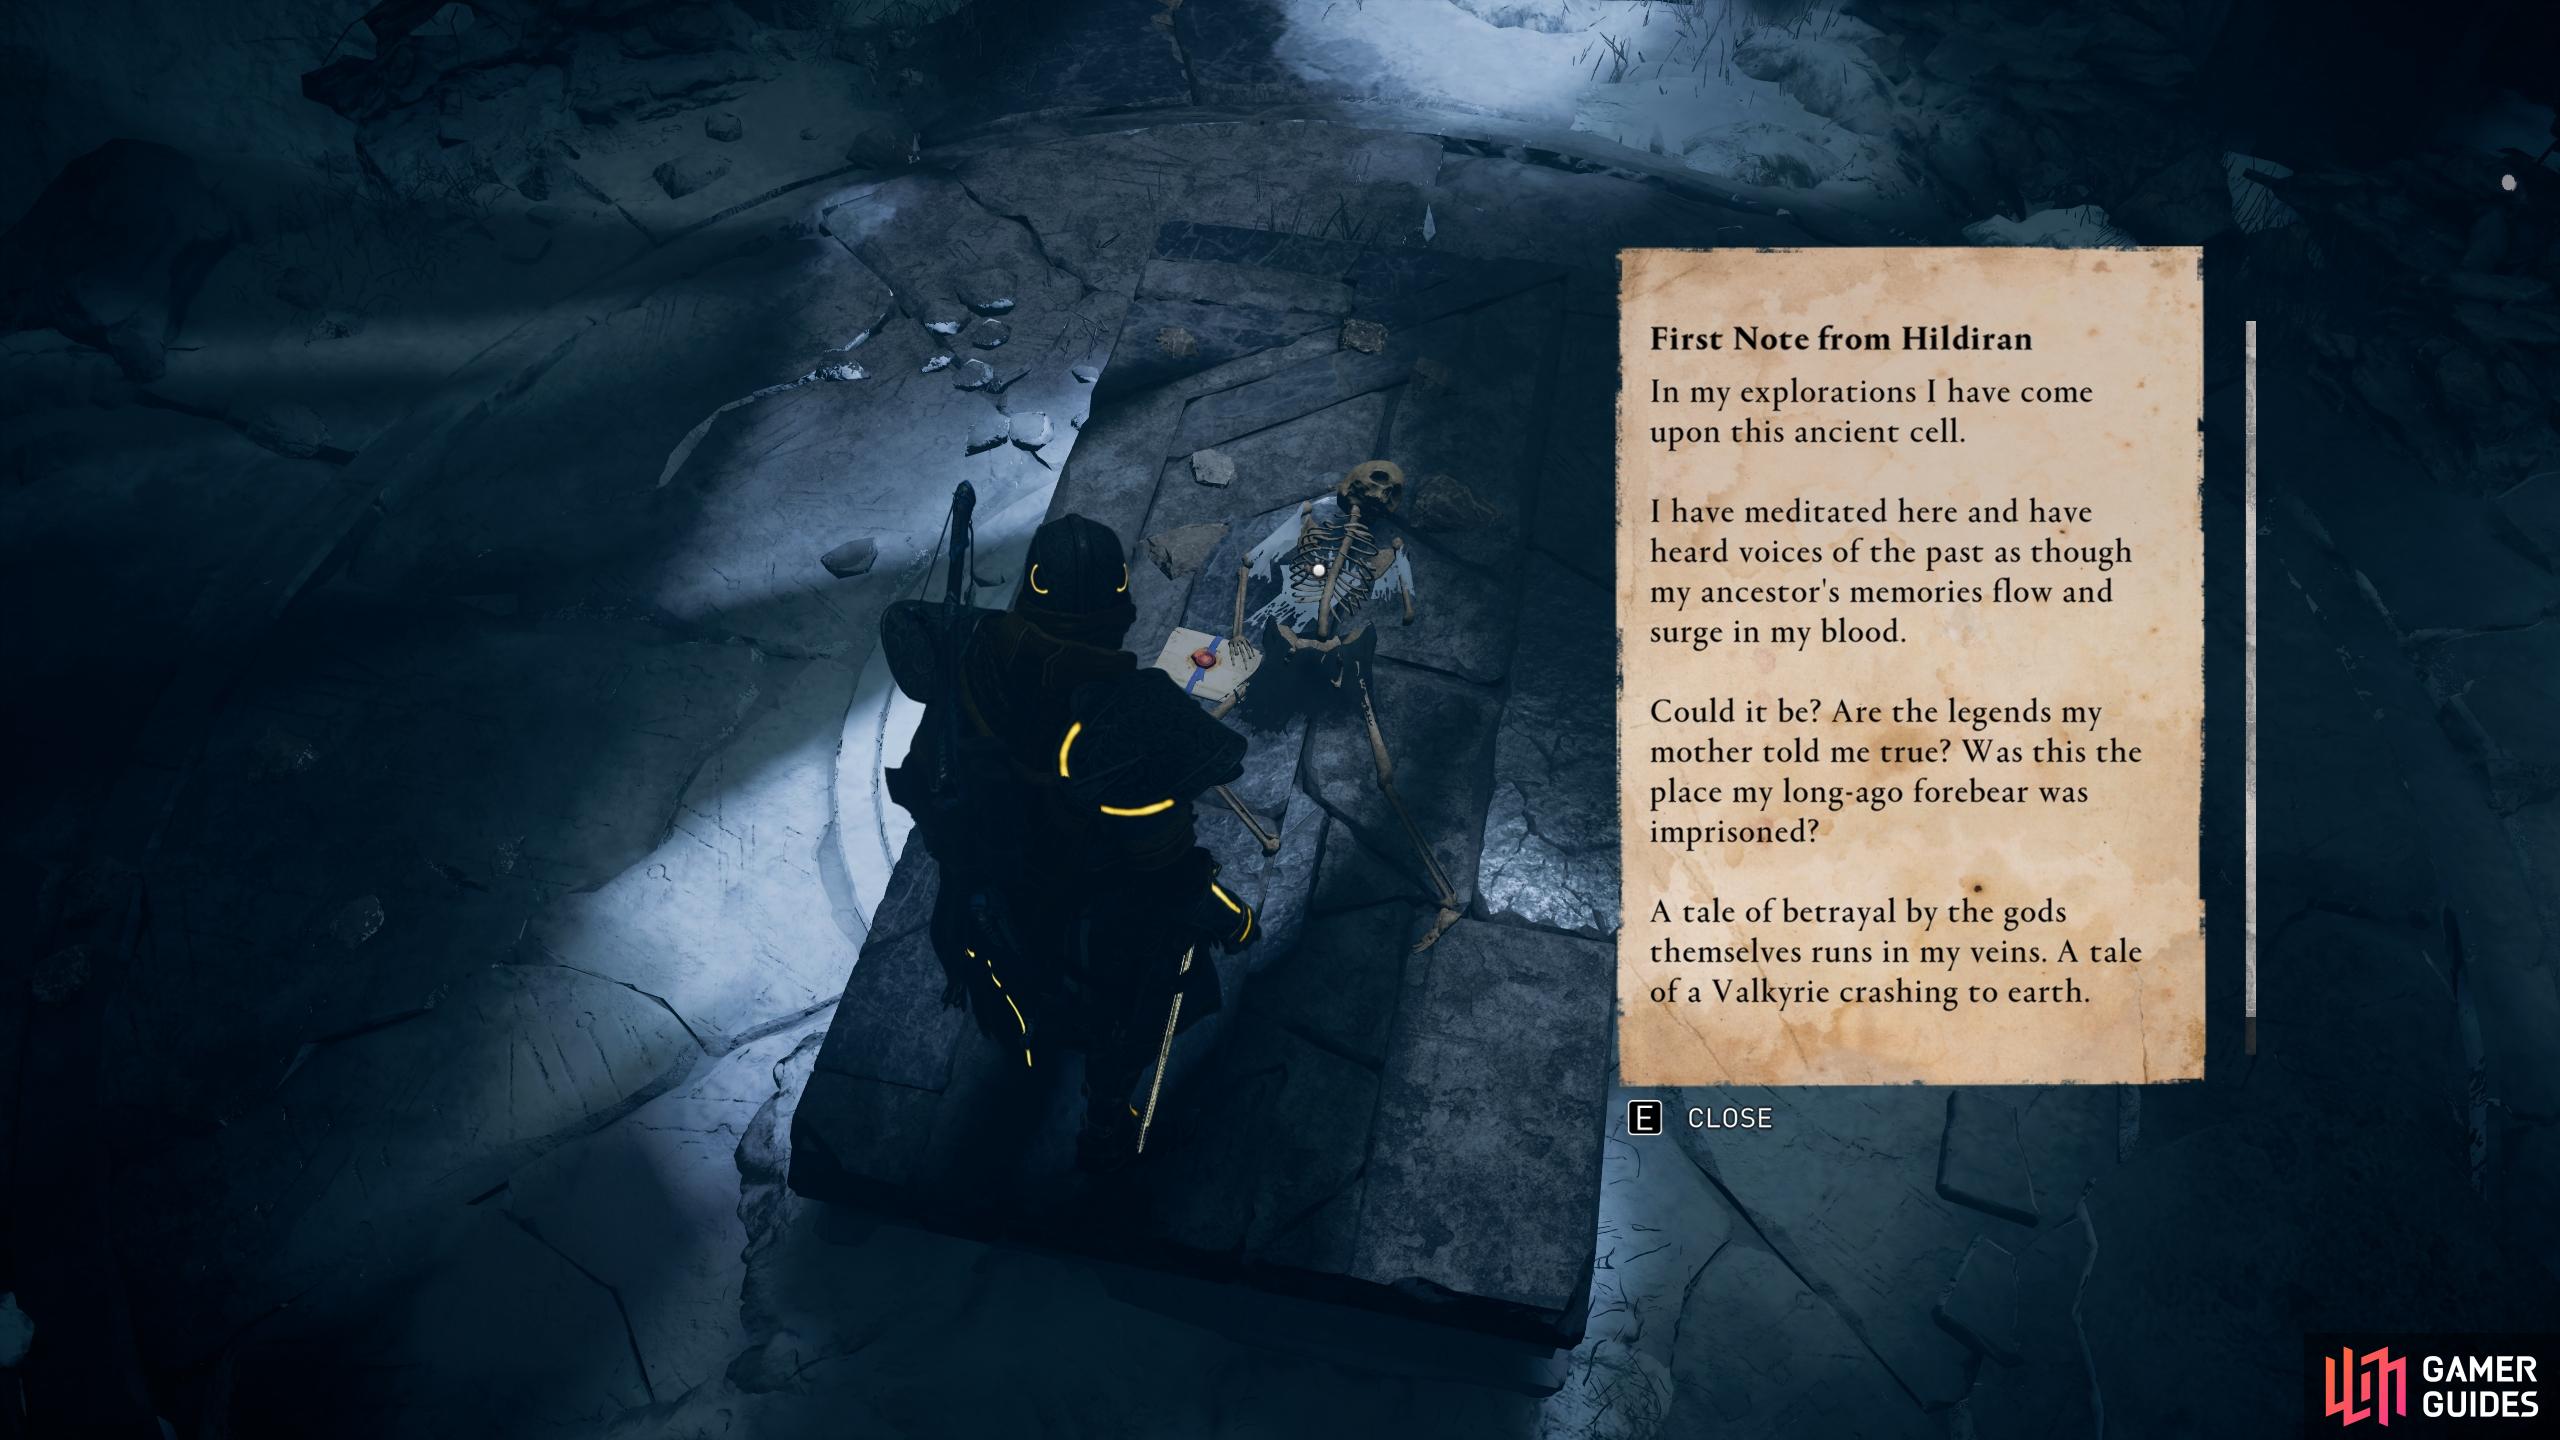 The note from Hildiran suggests that the Tomb of the Fallen content may be linked to the Mastery Challenges in a future update.